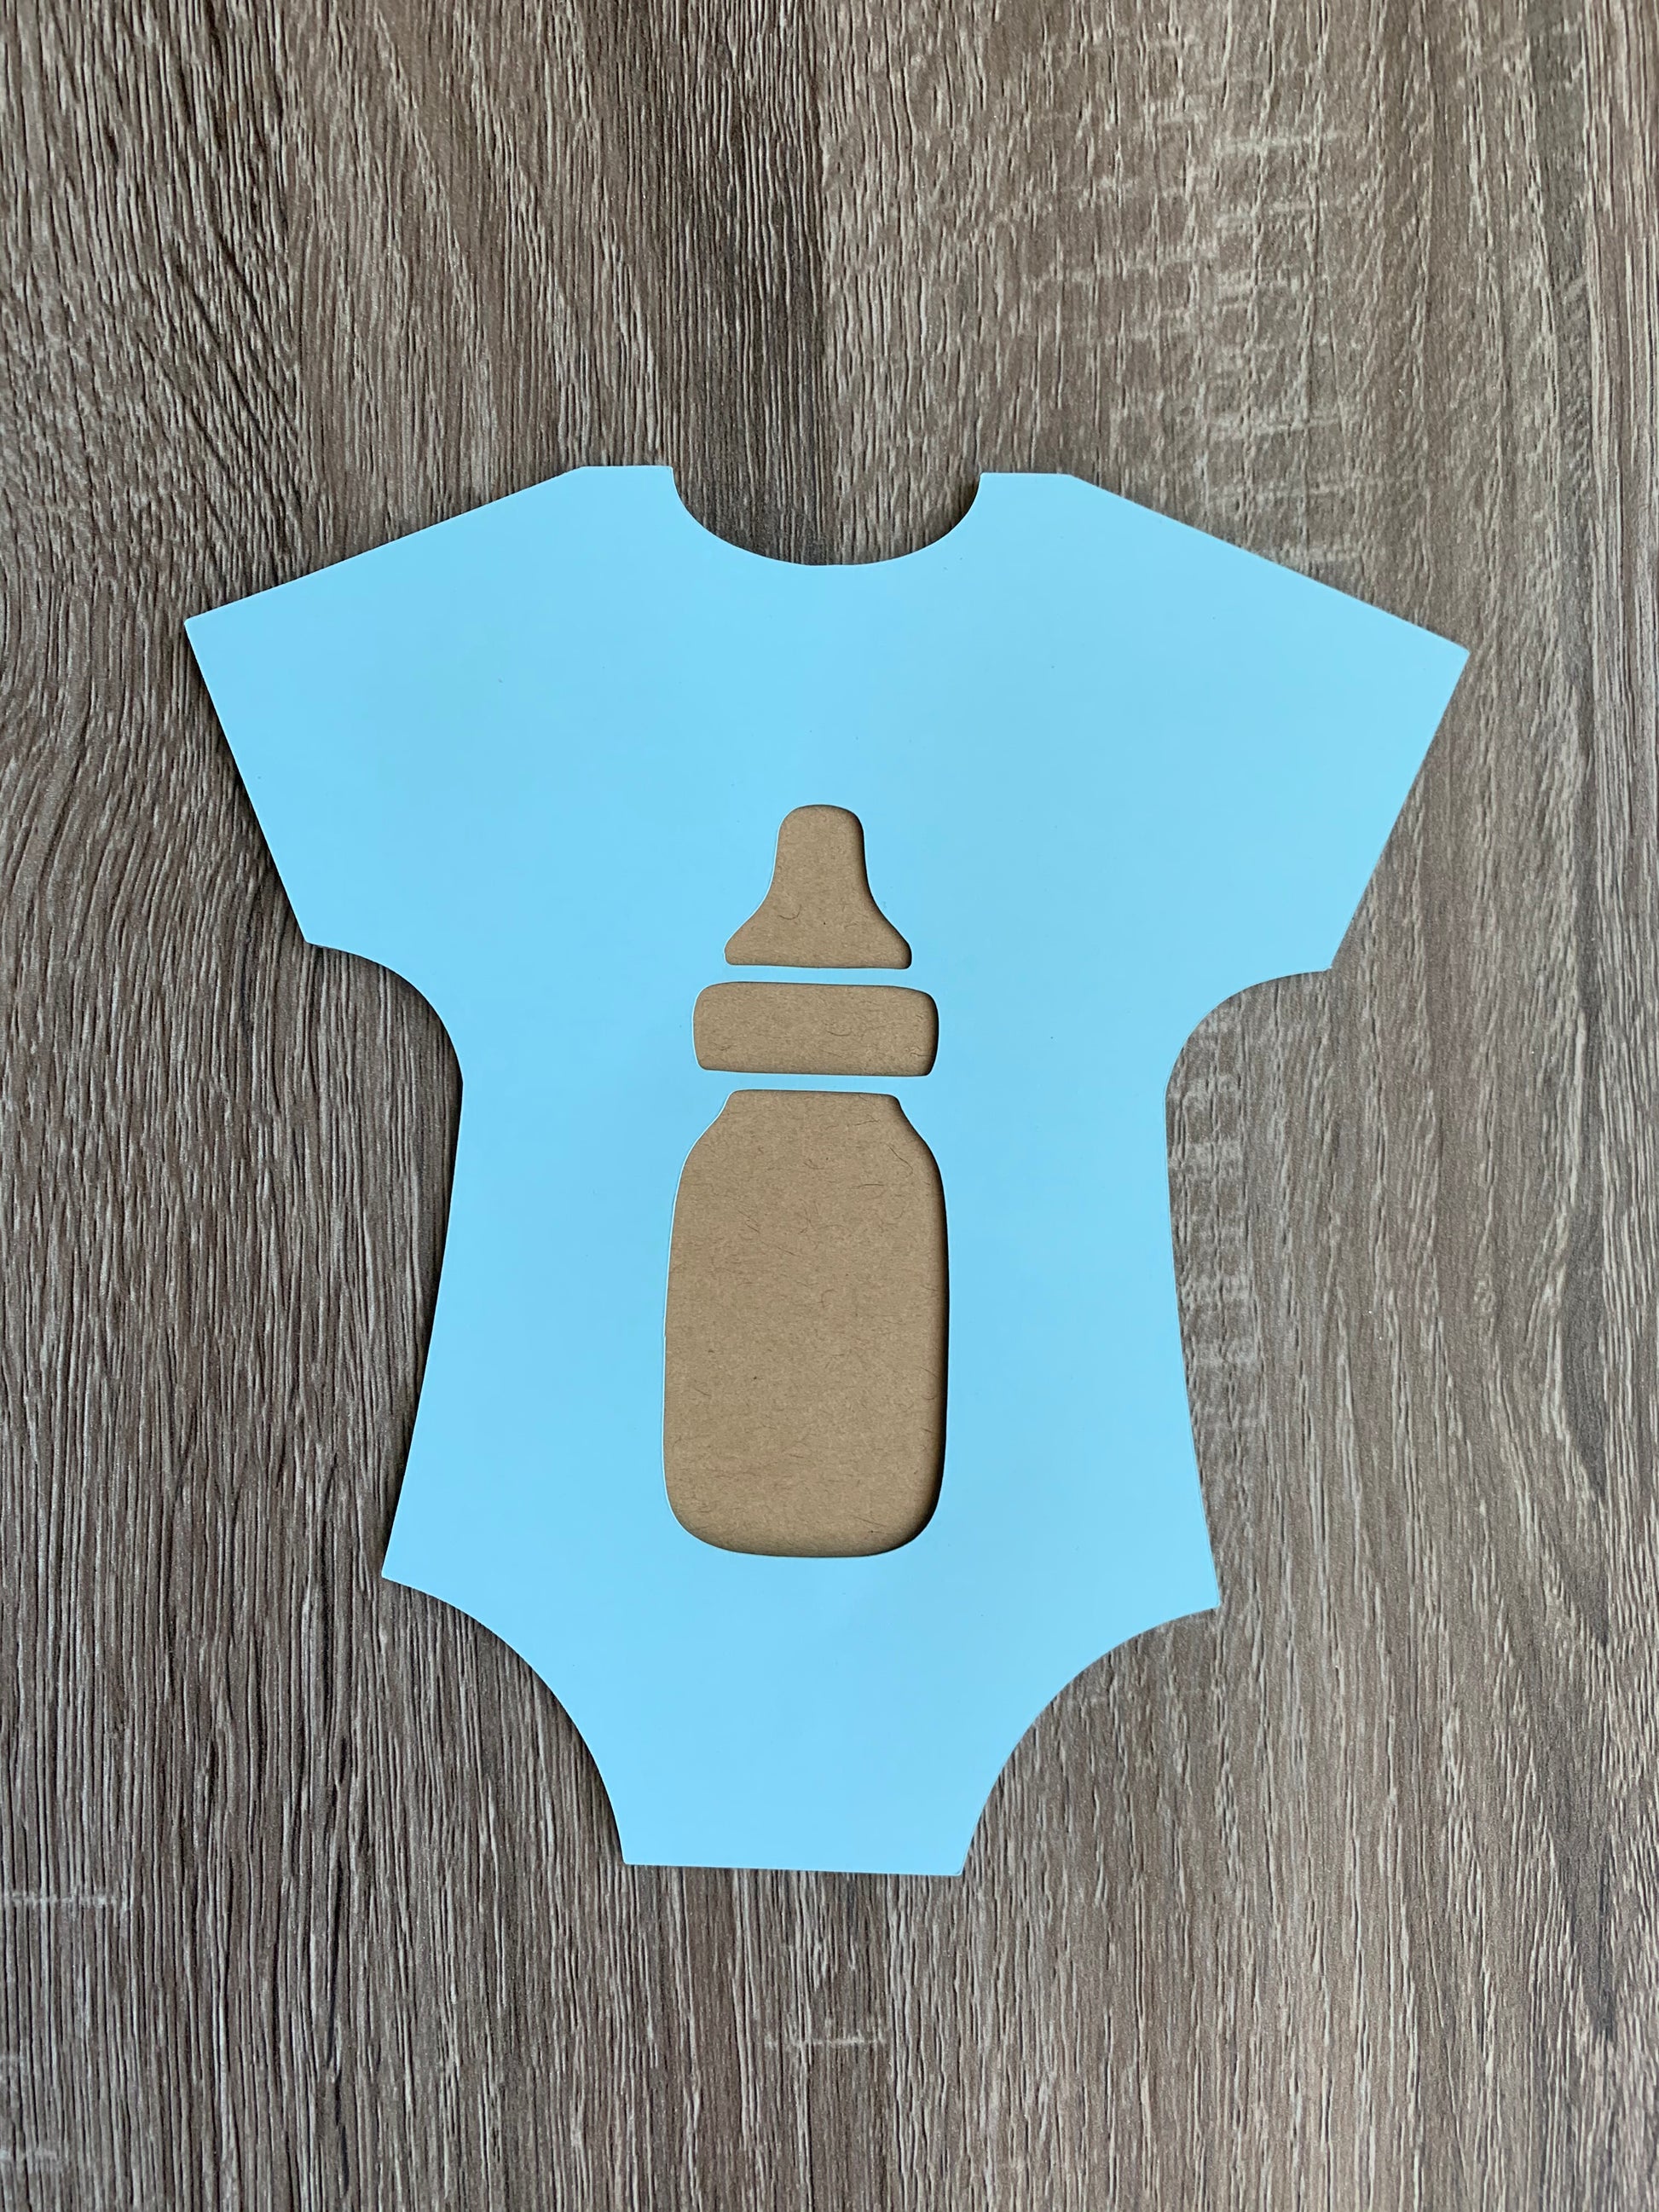 Decorate a Onesie” Baby Shower Activity with Supacolor Transfers